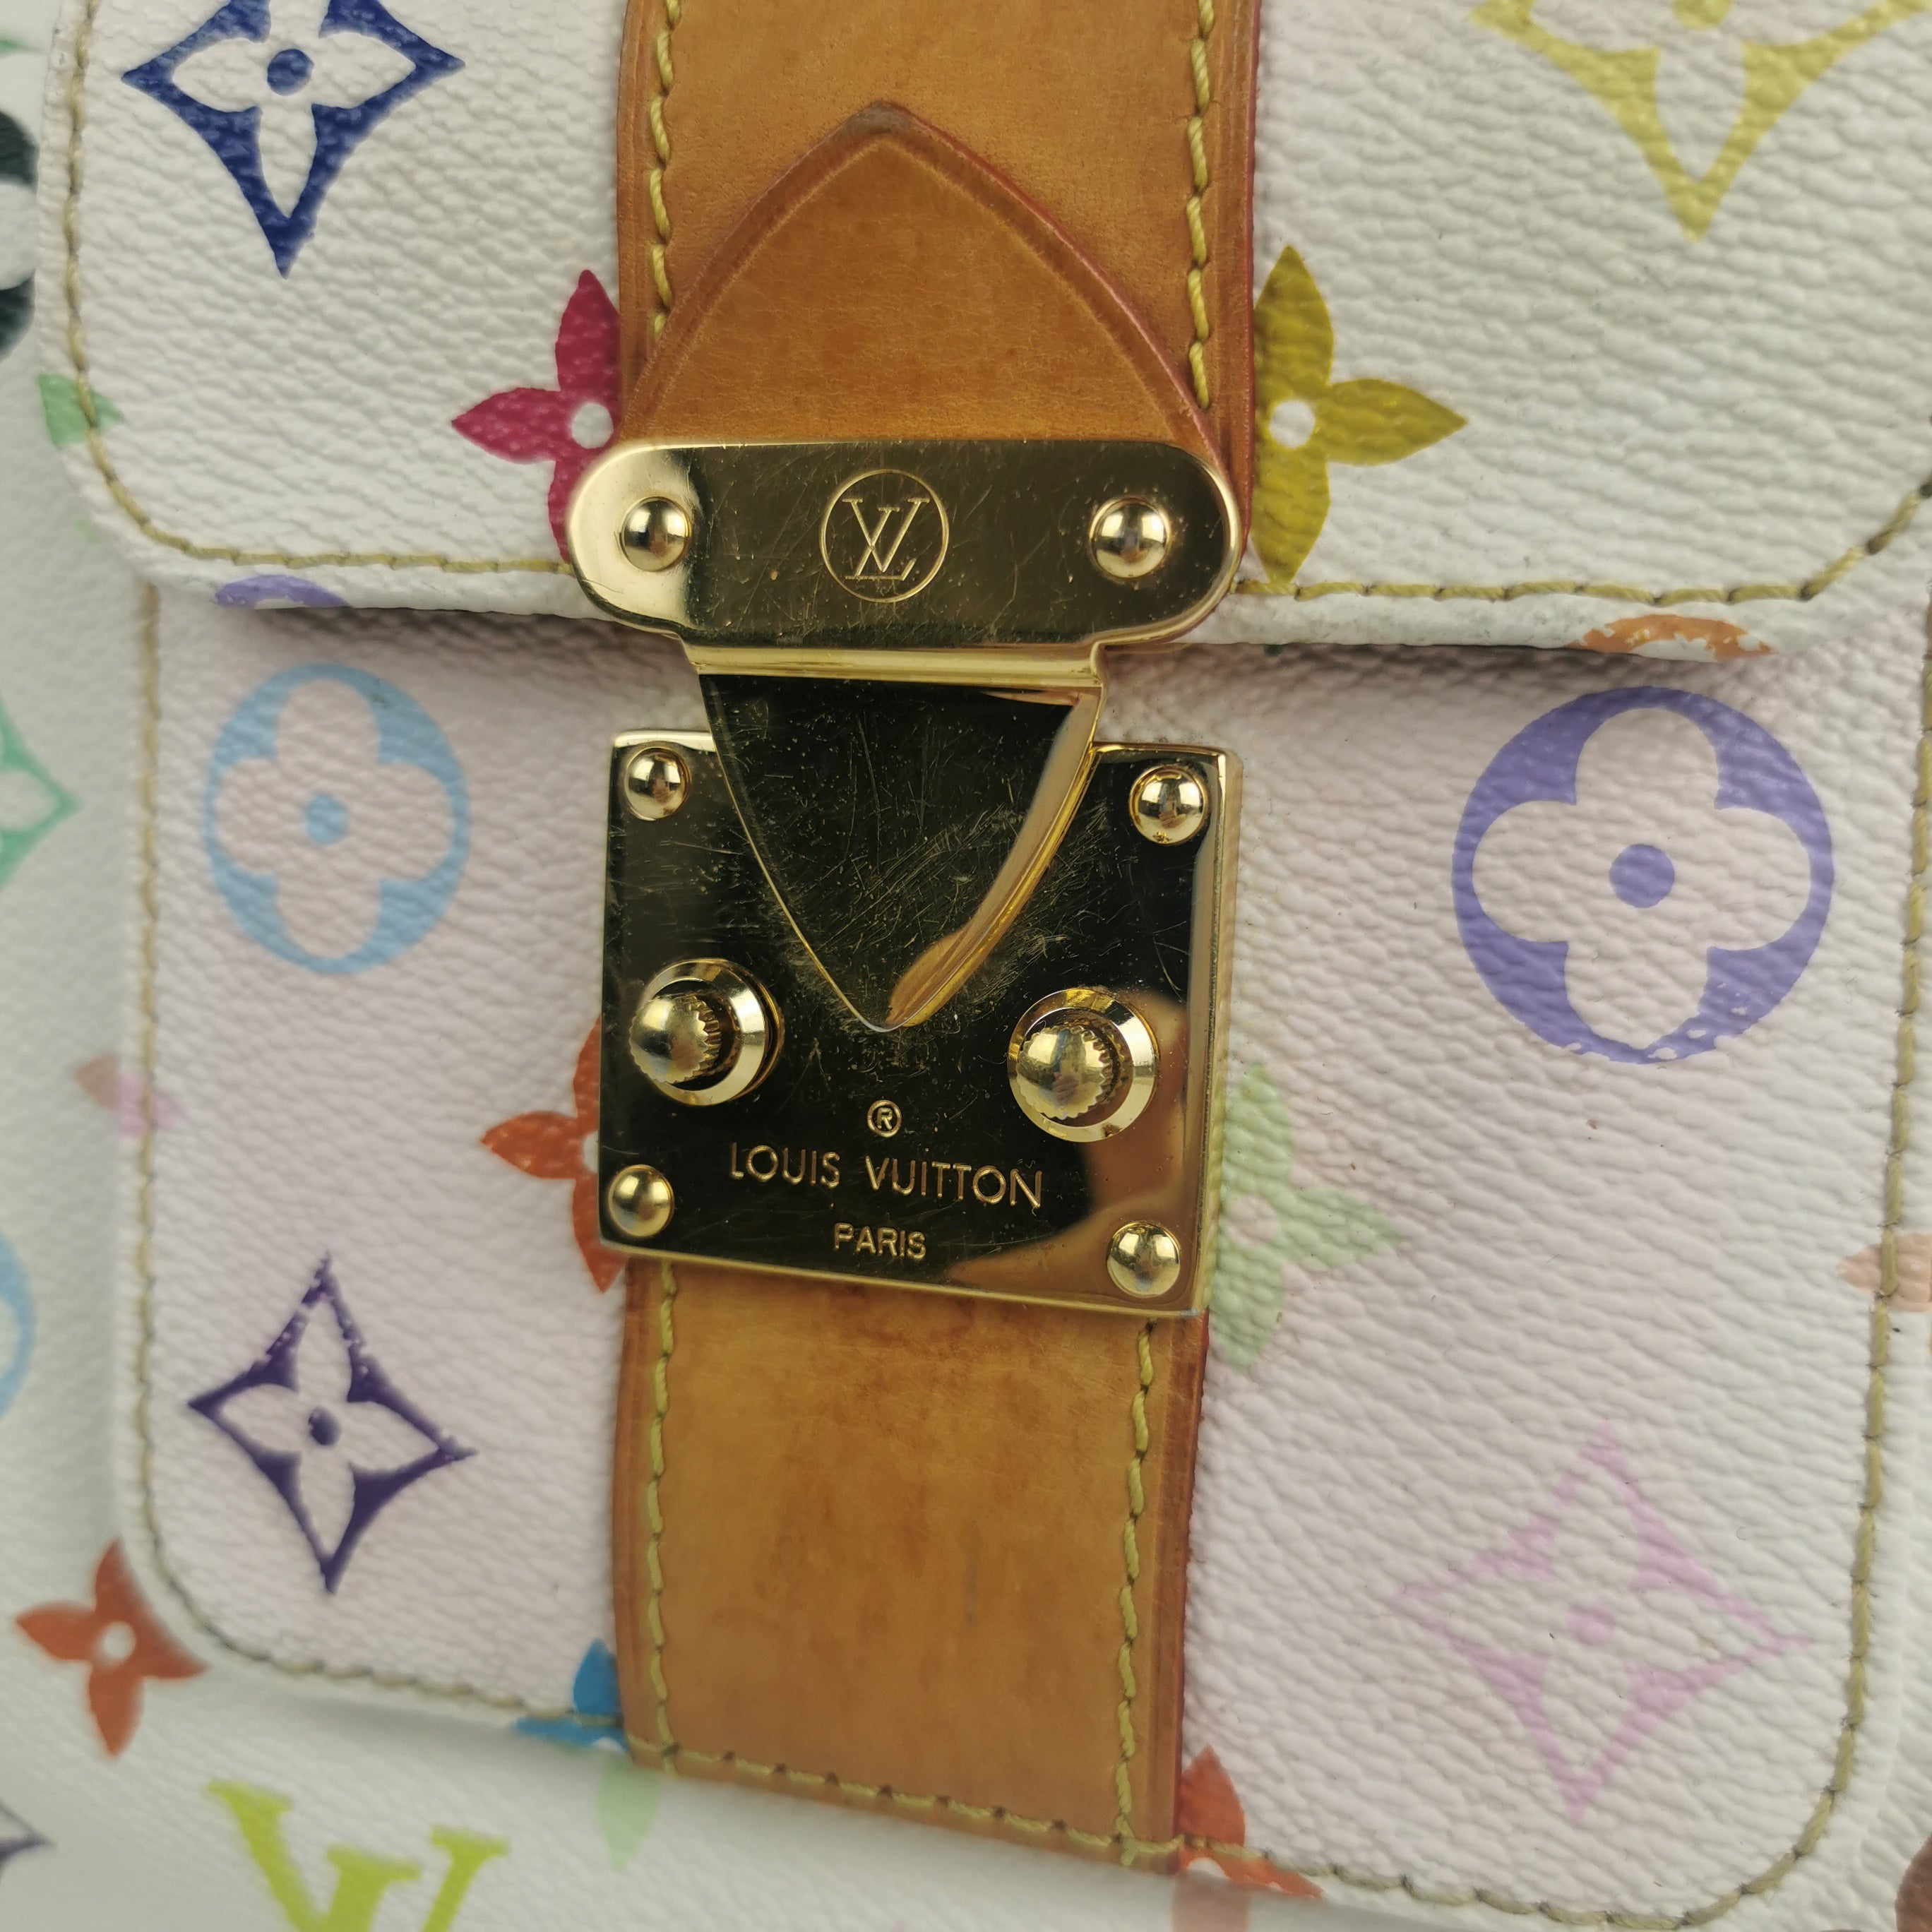 Louis Vuitton M44573 Limited Edition Monogram Giant Speedy 30 Multi Ca –  Italy Station